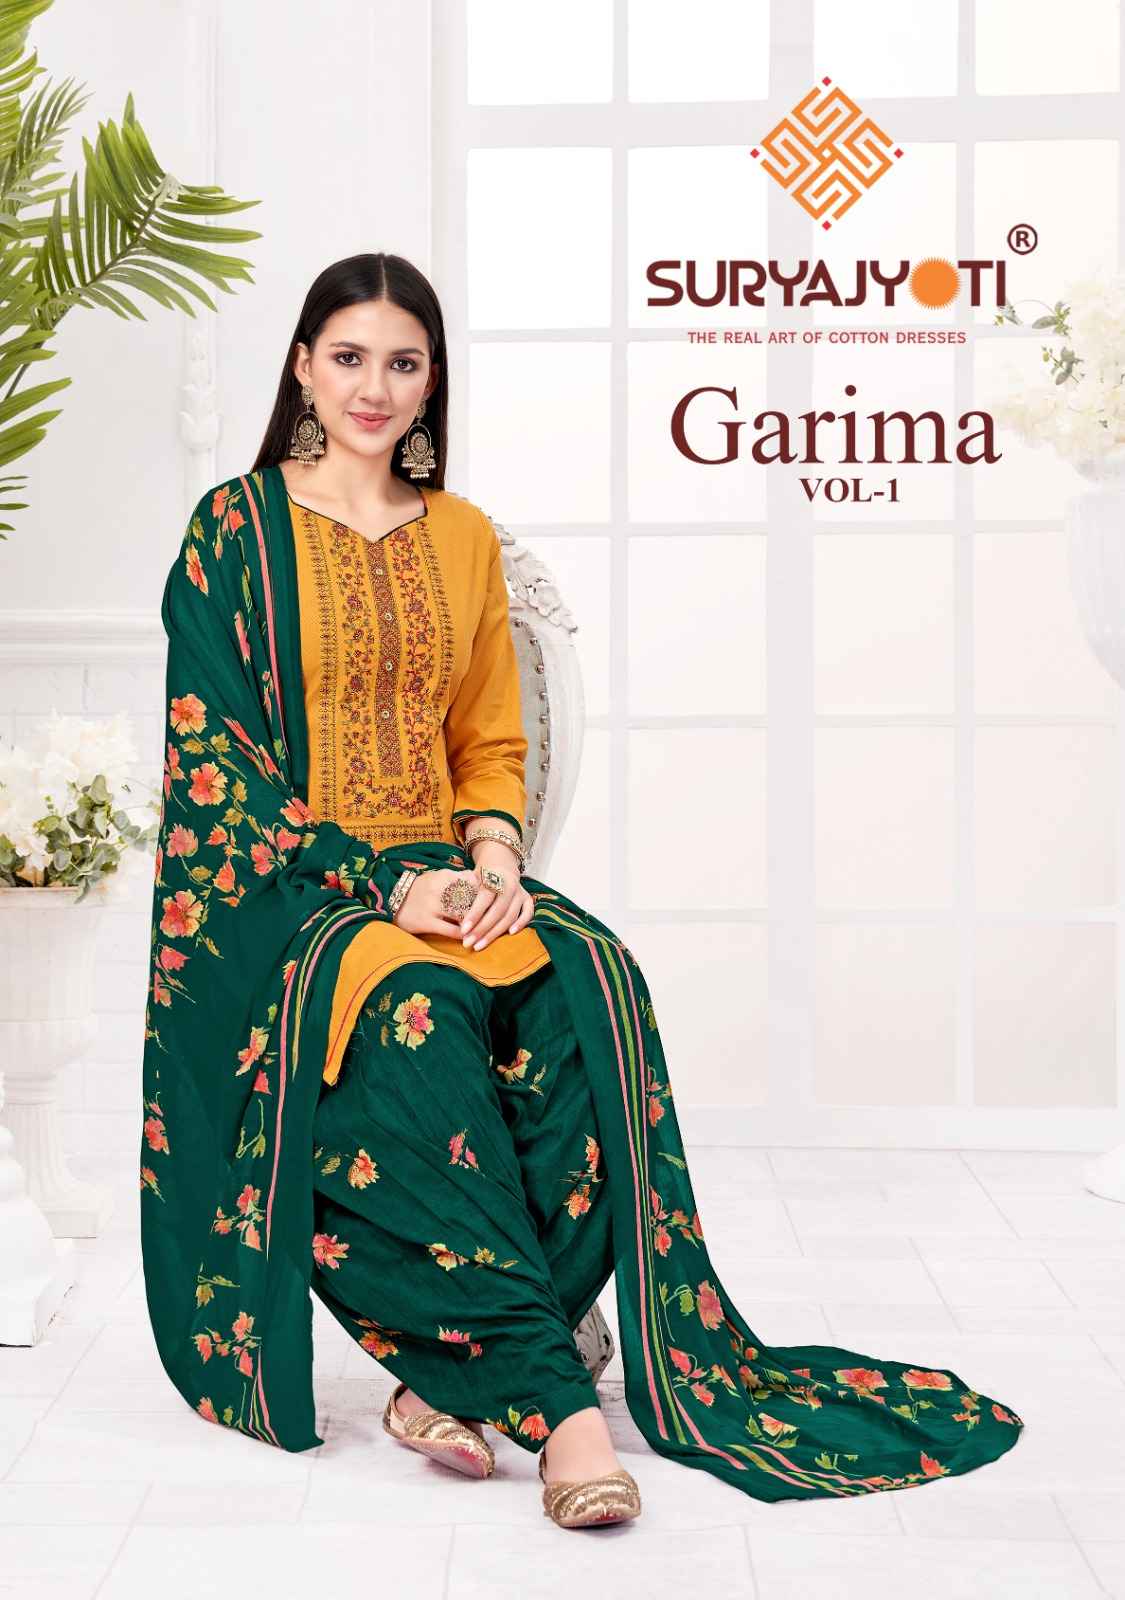  SURYAJYOTI GARIMA VOL 1 COTTON PRINT WITH NECK EMBROIDERY WORK SUITS 